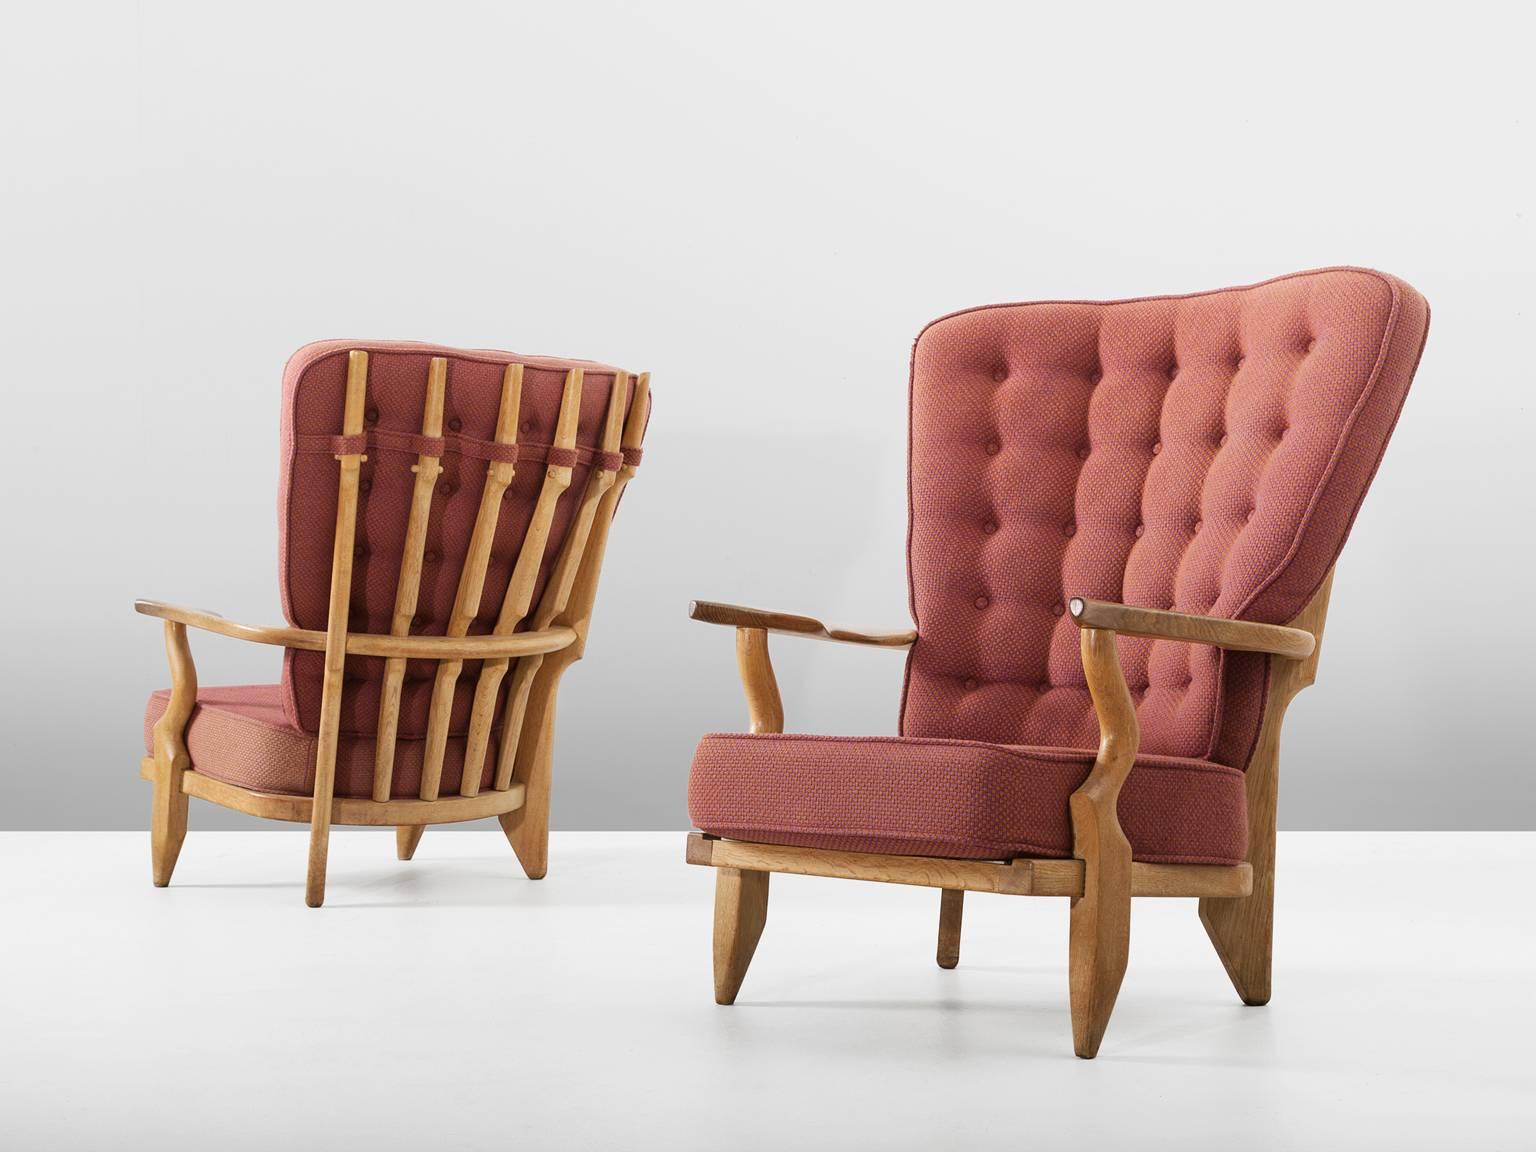 Pair of lounge chairs, in oak and fabric, by Guillerme et Chambron, France, 1960s.

Set of two extraordinary Guillerme & Chambron high back lounge chairs, in solid oak with the typical characteristic decorative details at the back and capricious